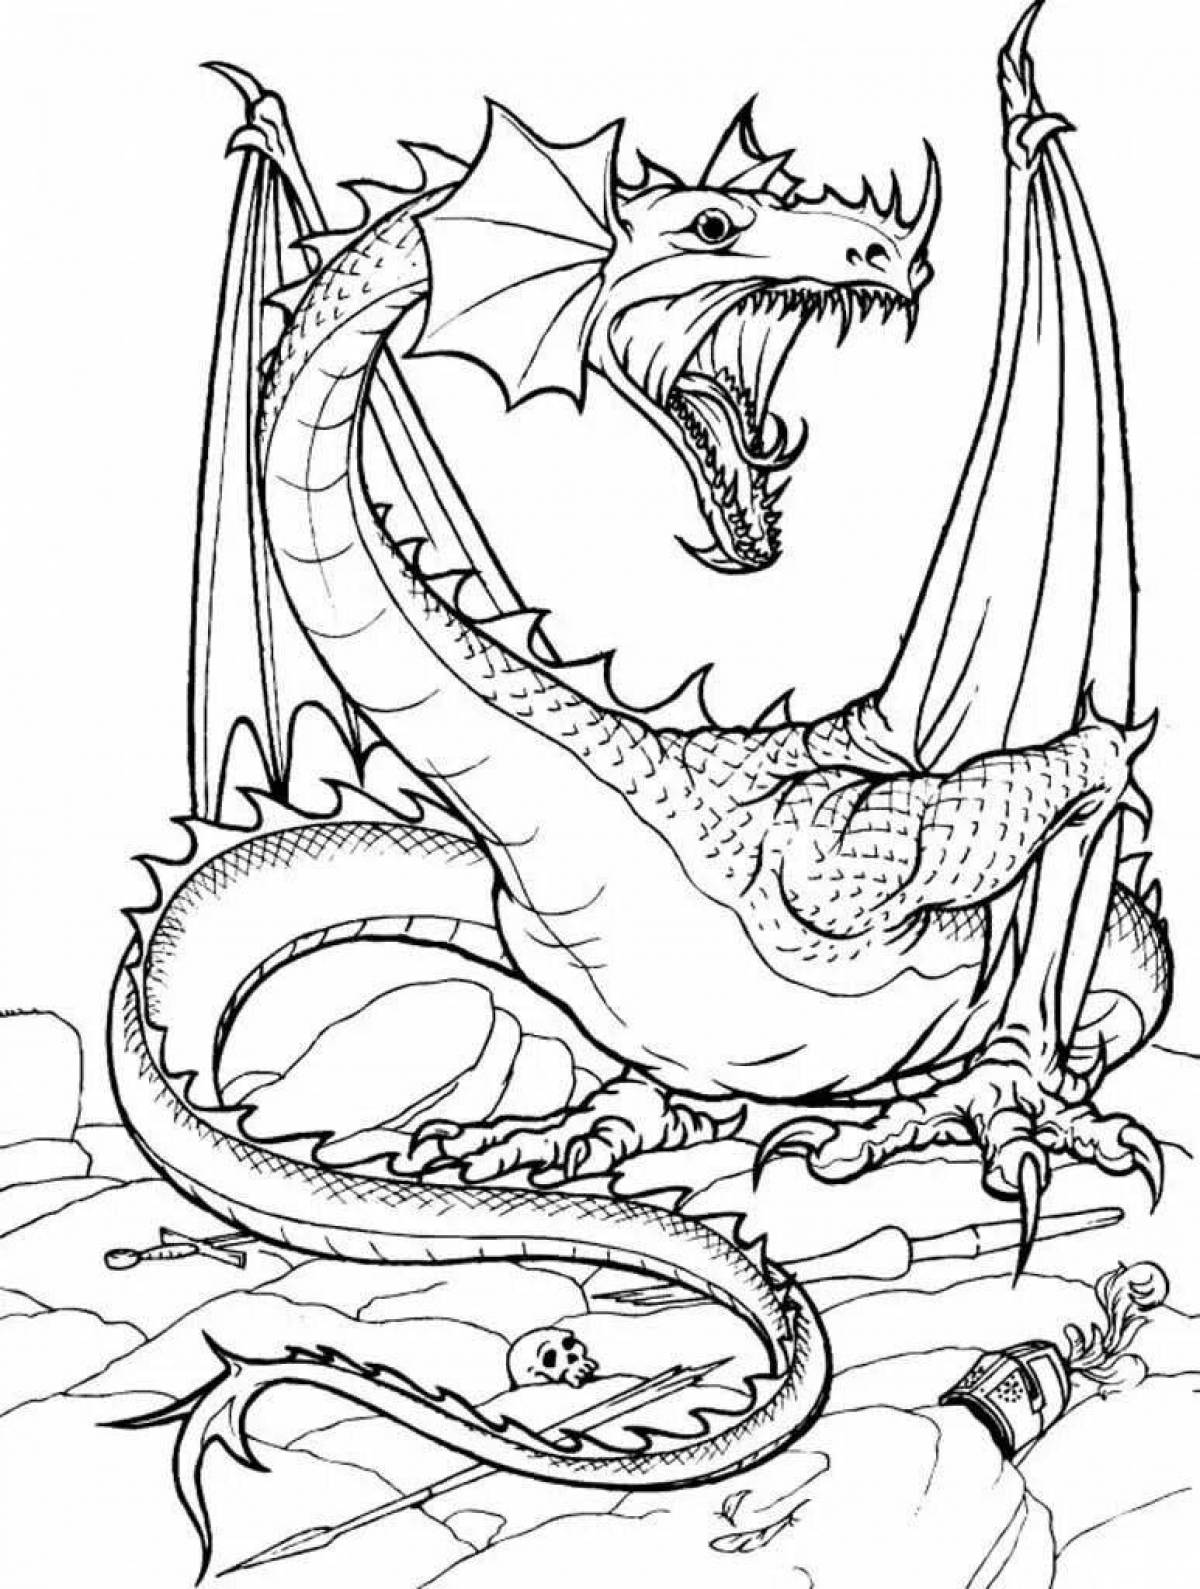 Unique dragons coloring pages for kids 6-7 years old